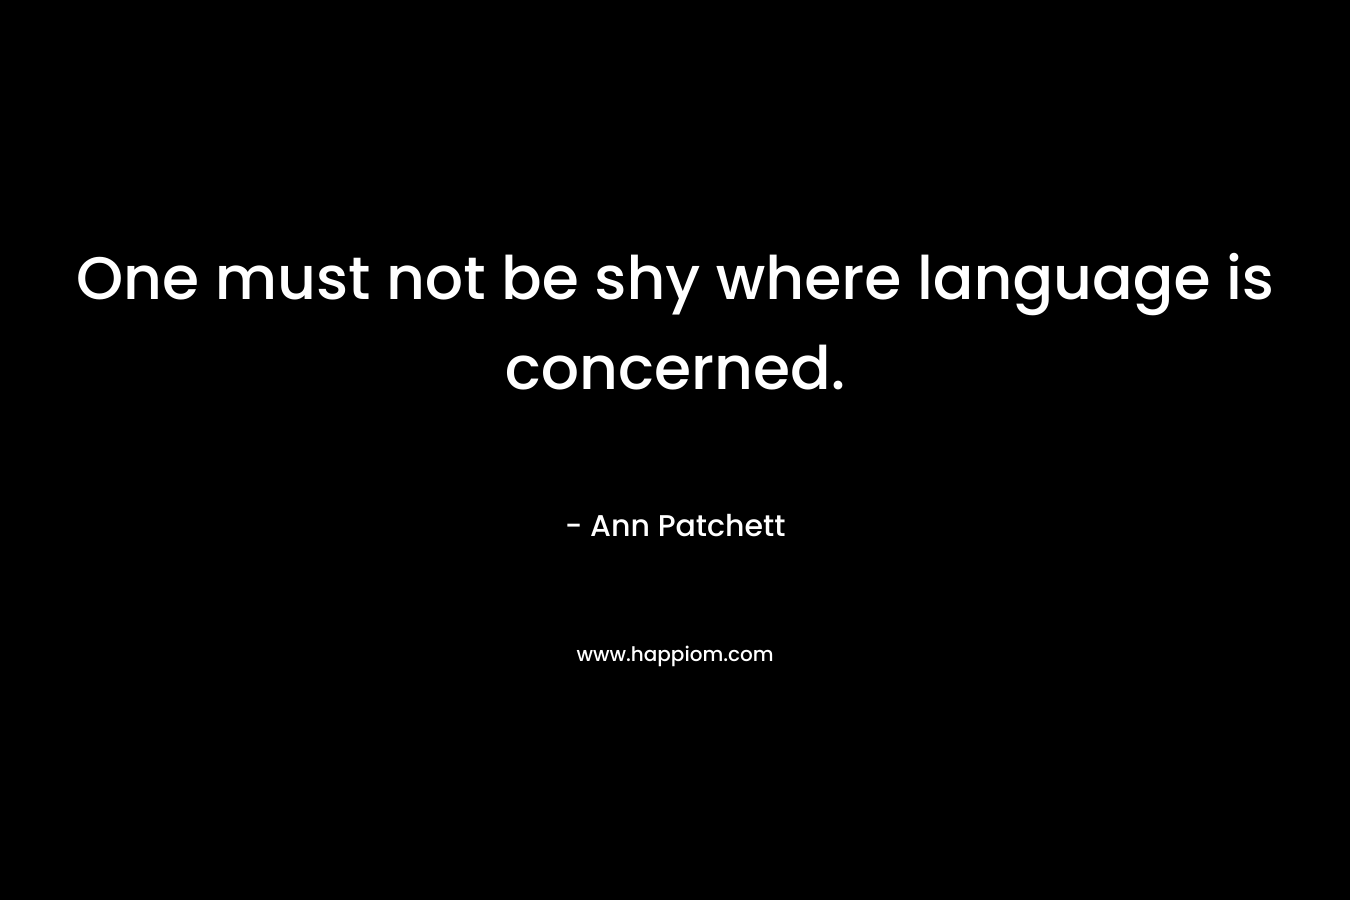 One must not be shy where language is concerned.